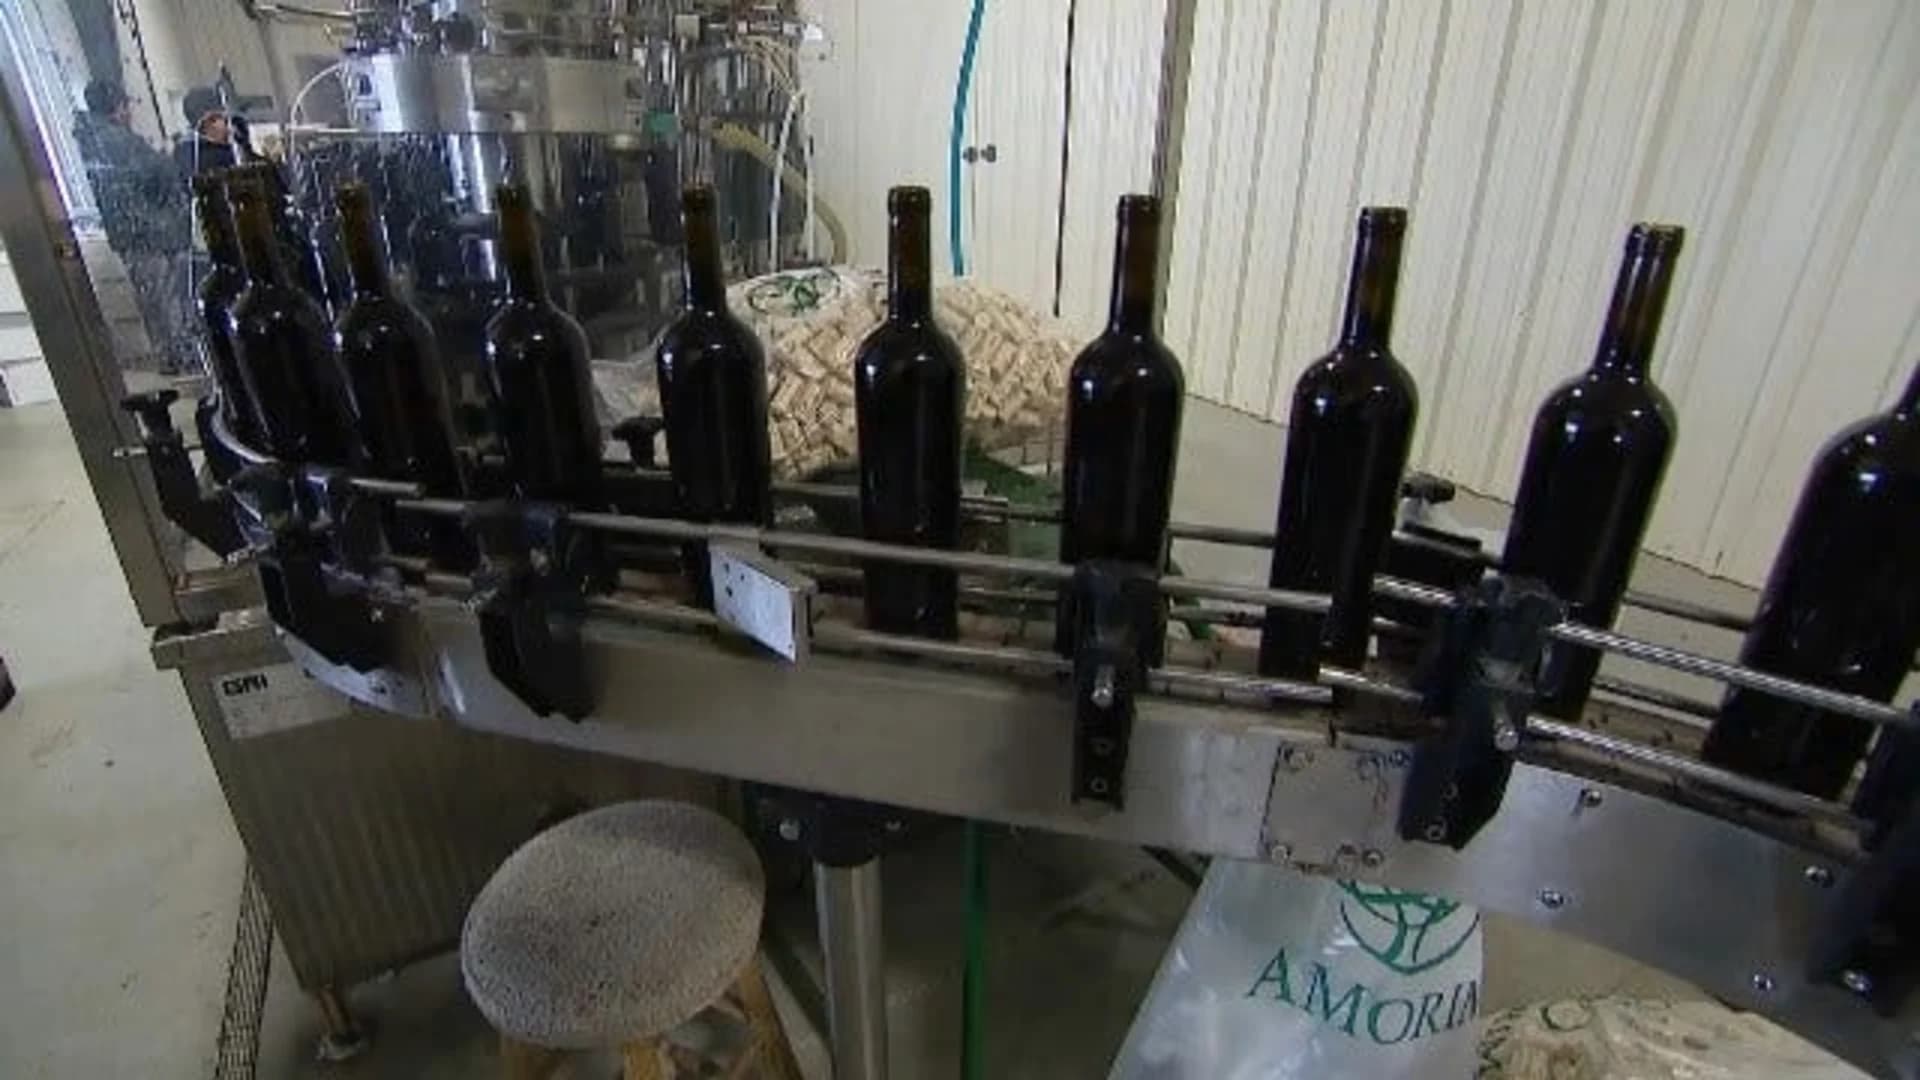 East End: Pindar Winery's port-style wine